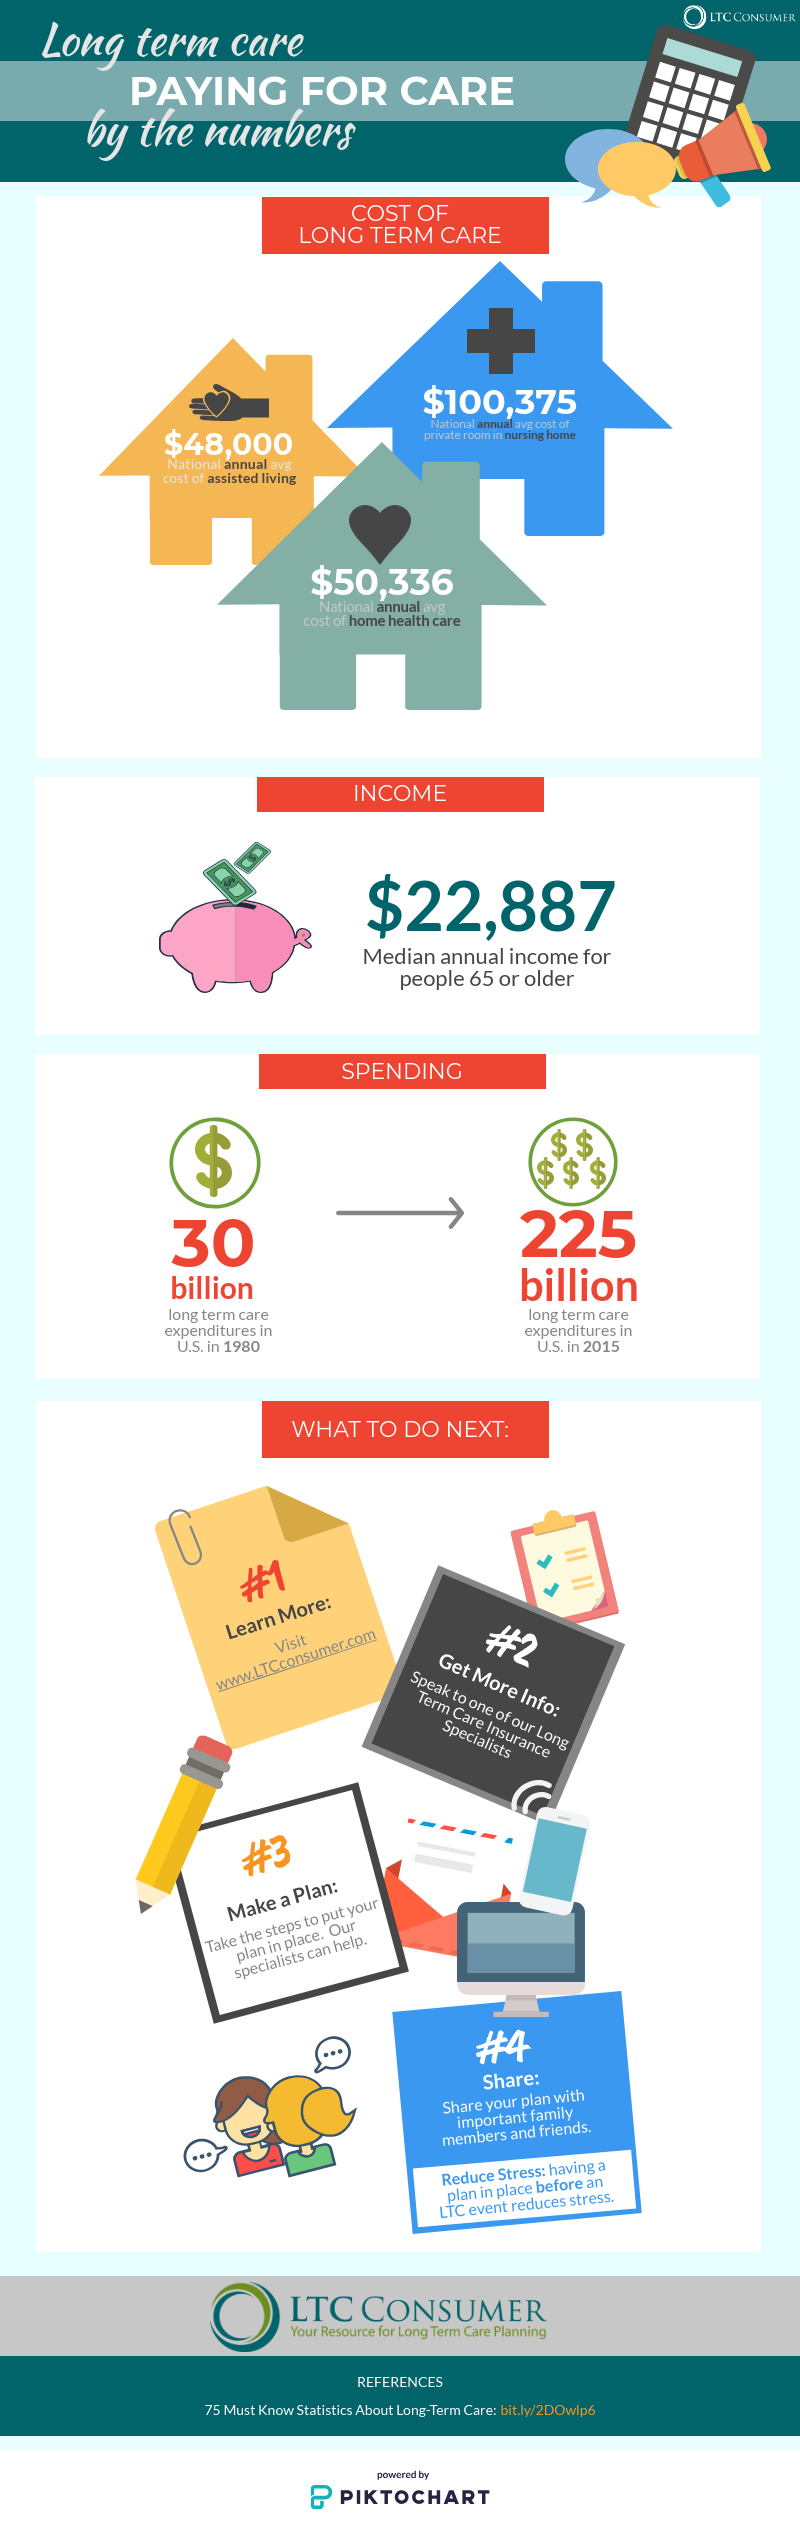 LTC-by-the-Numbers_Paying-for-Care_Infographic_4_19